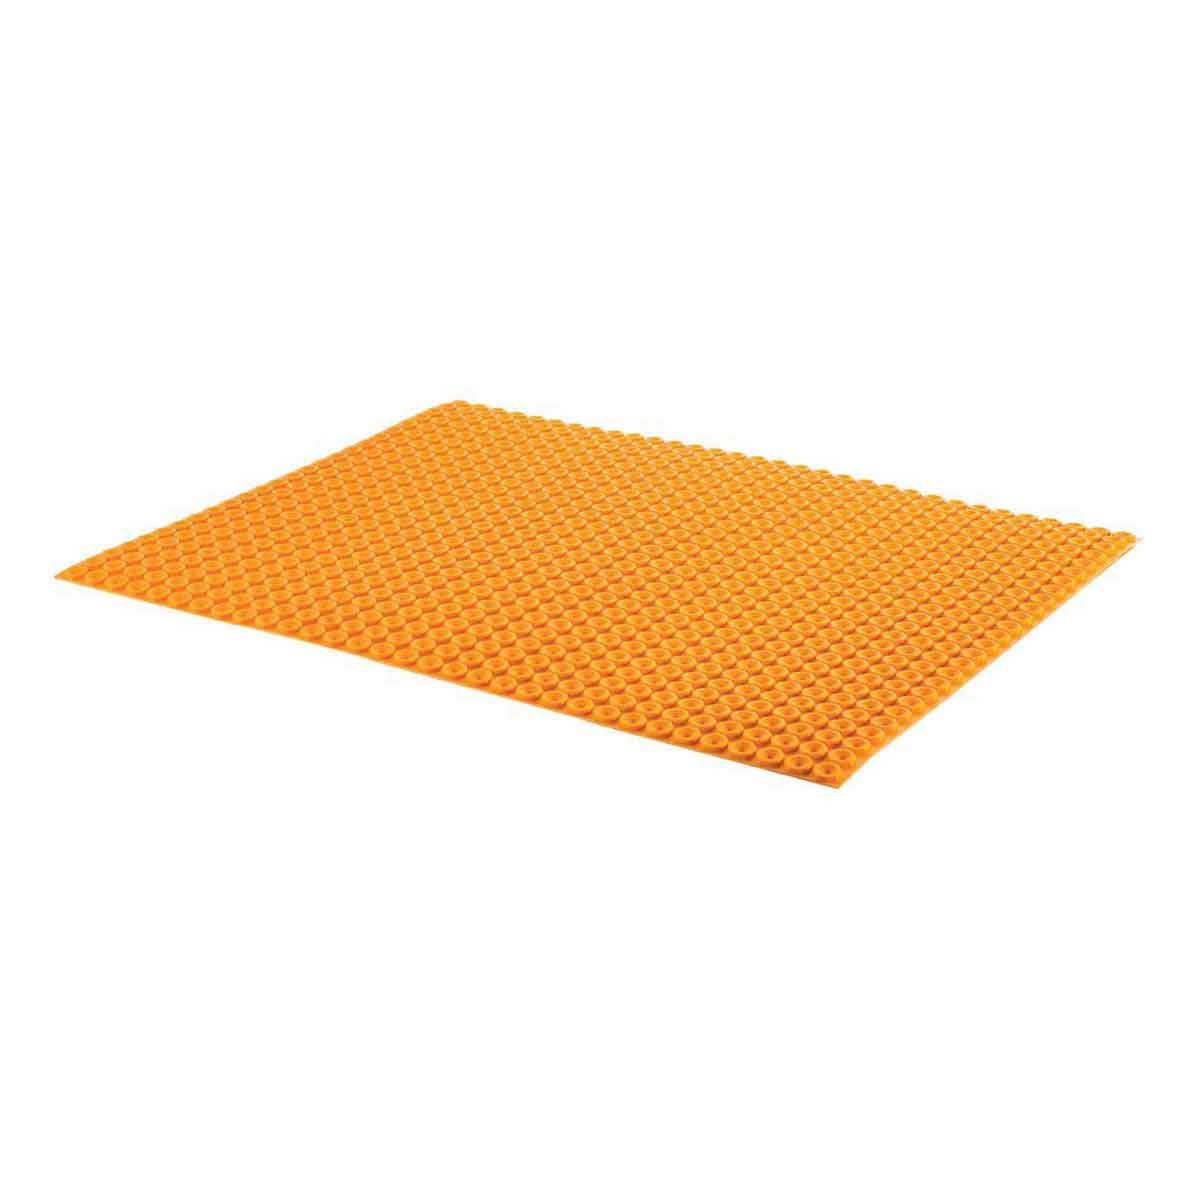 Schluter Systems Ditra Heat DH5MA Uncoupling and Waterproofing Polypropylene Membrane 1/4 Inch Underlayment 8.4 Square Feet Sheet 8 Pcs